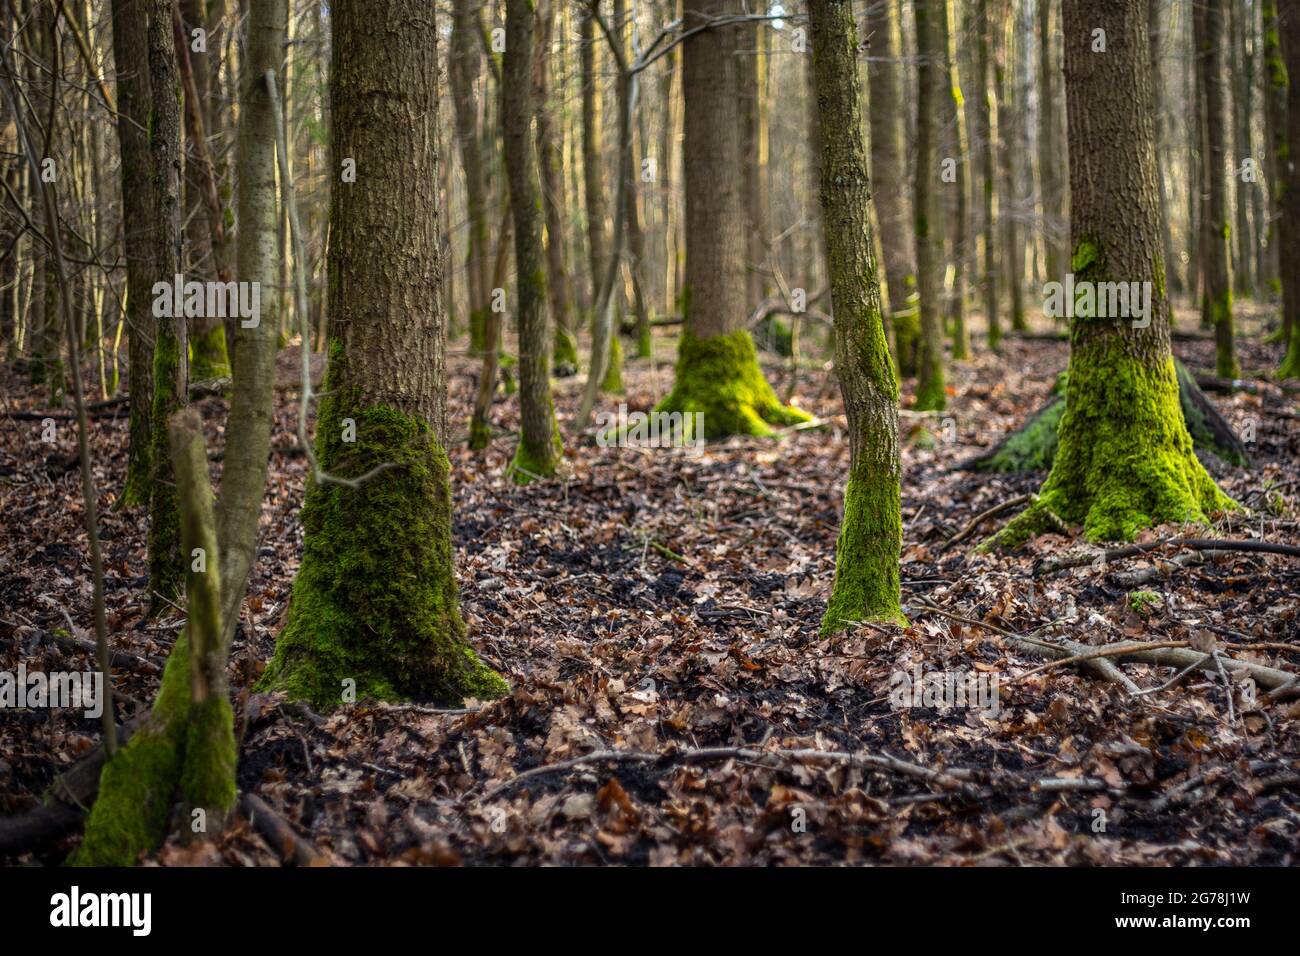 Moss-covered tree trunks in the forest Stock Photo